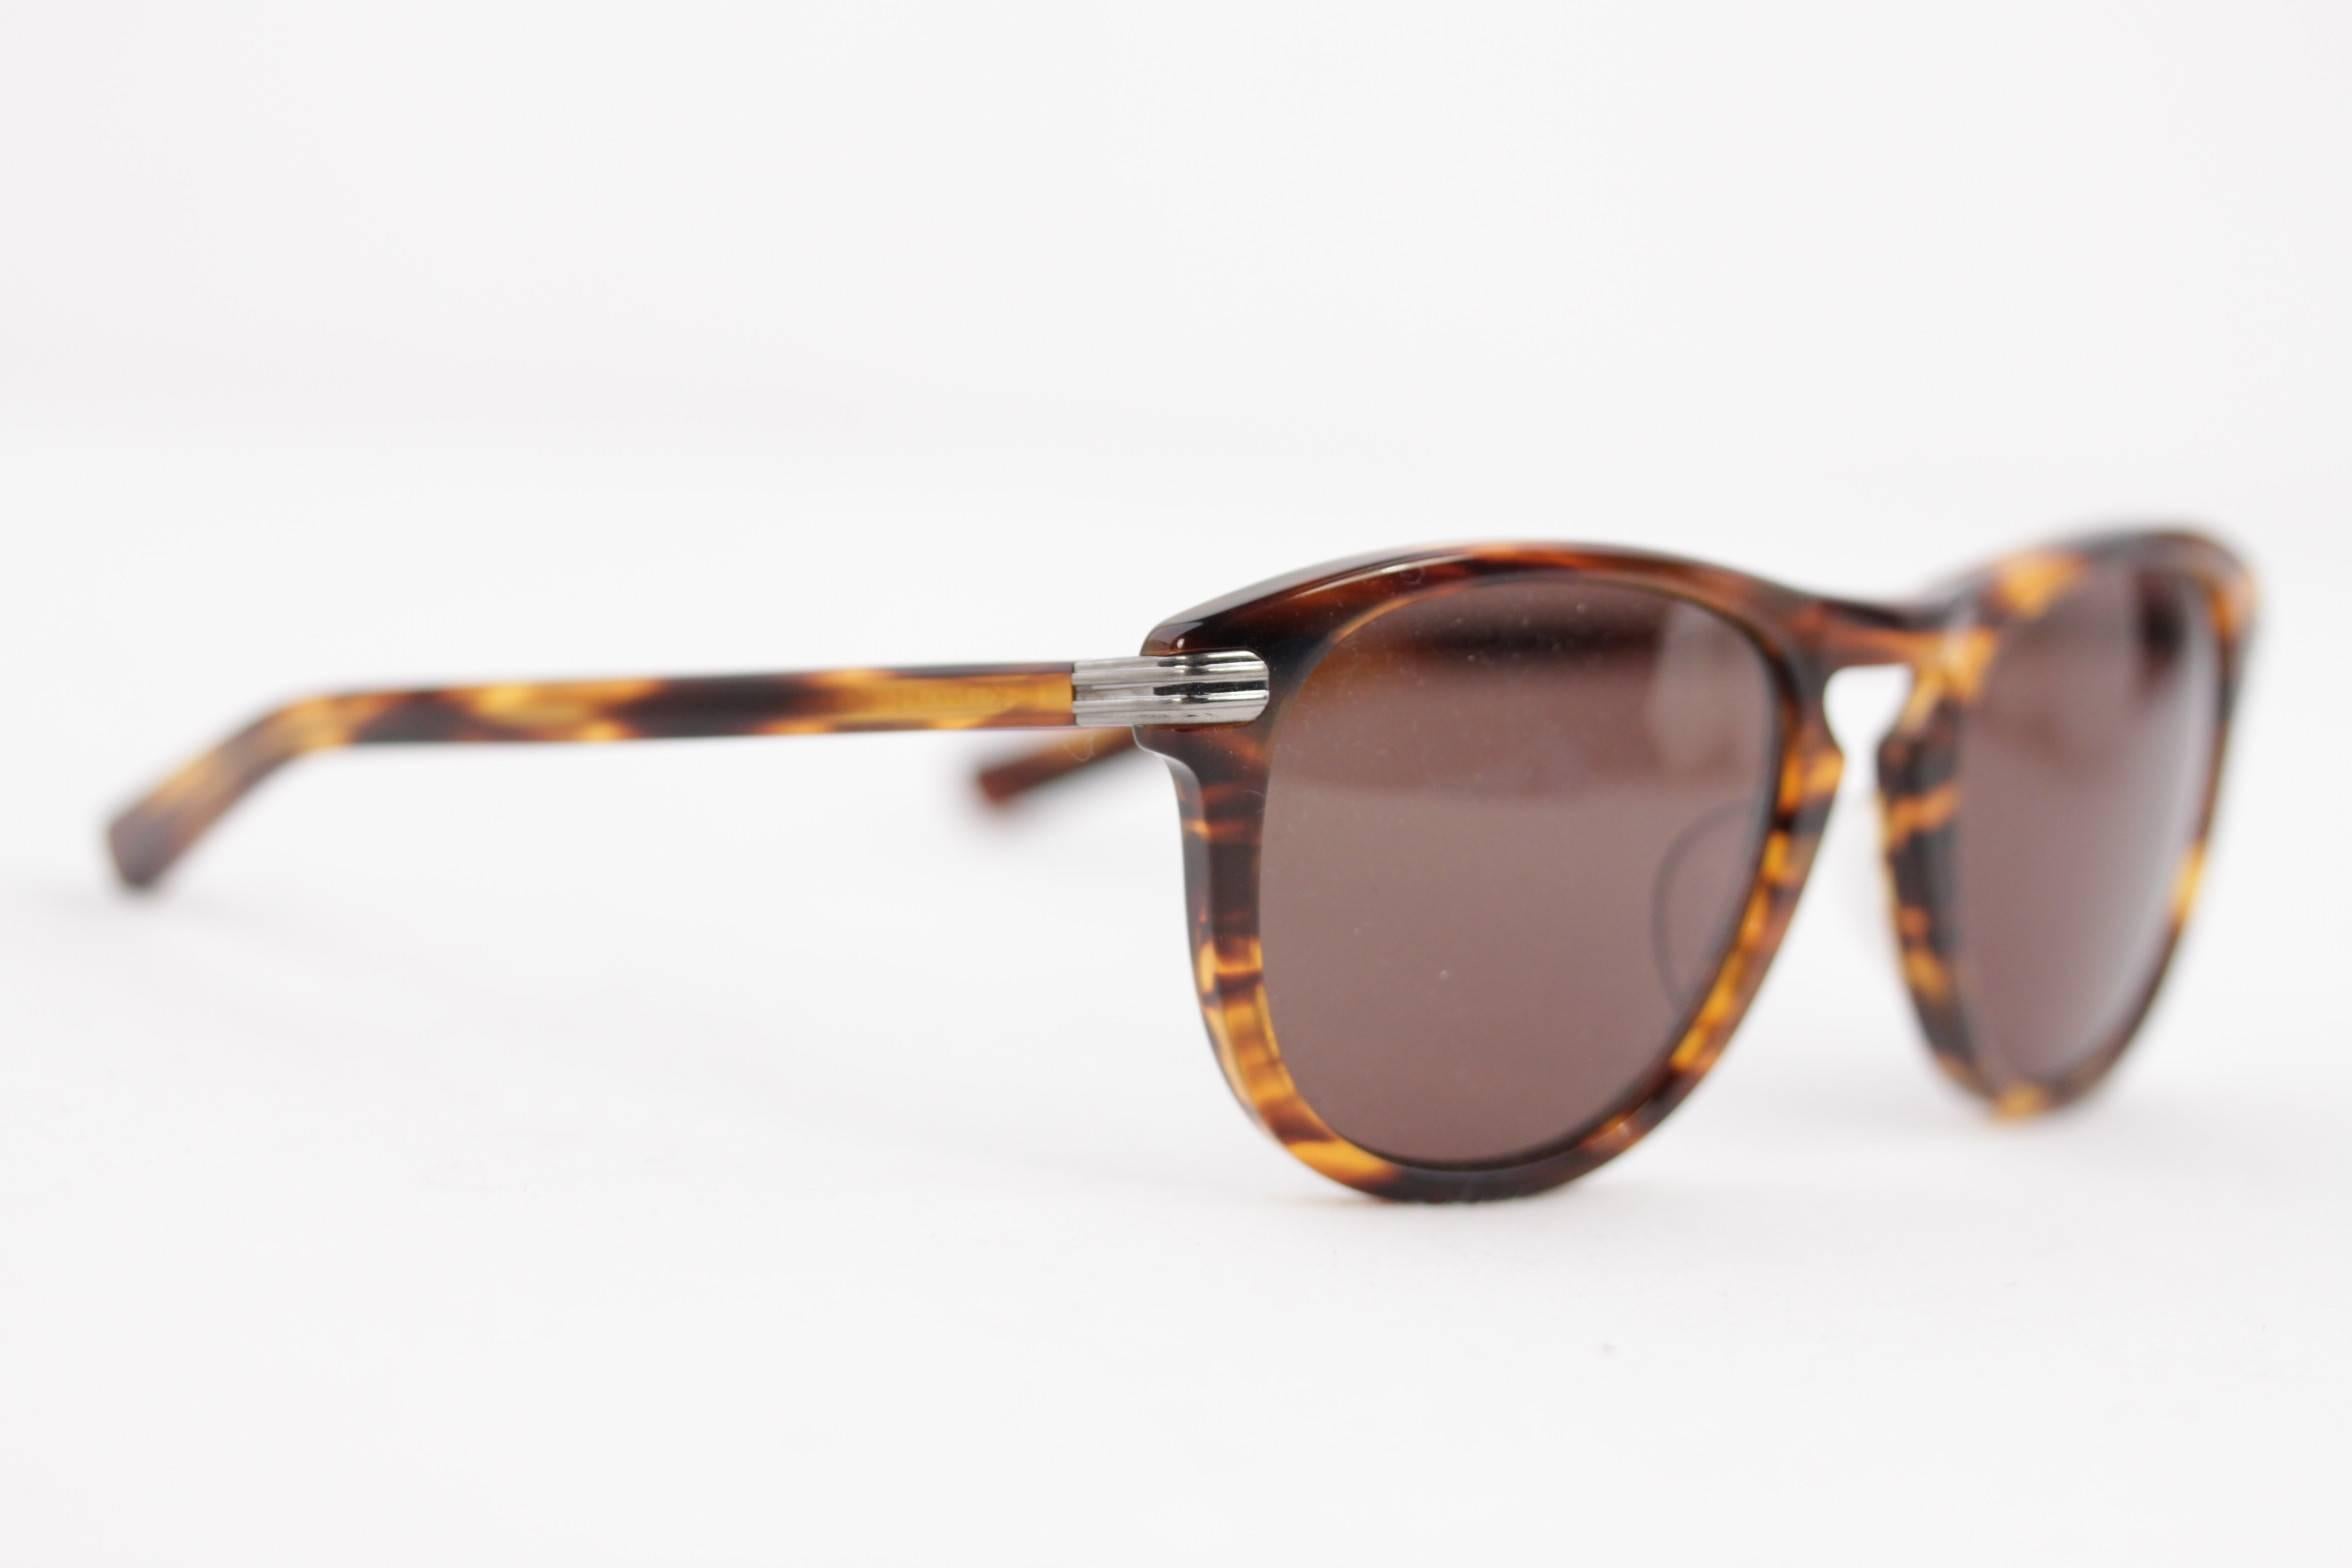 OLIVER PEOPLES Brown tortoise SUNGLASSES CANTON OV 5275SD 143371 56/22 140 3N In Excellent Condition In Rome, Rome